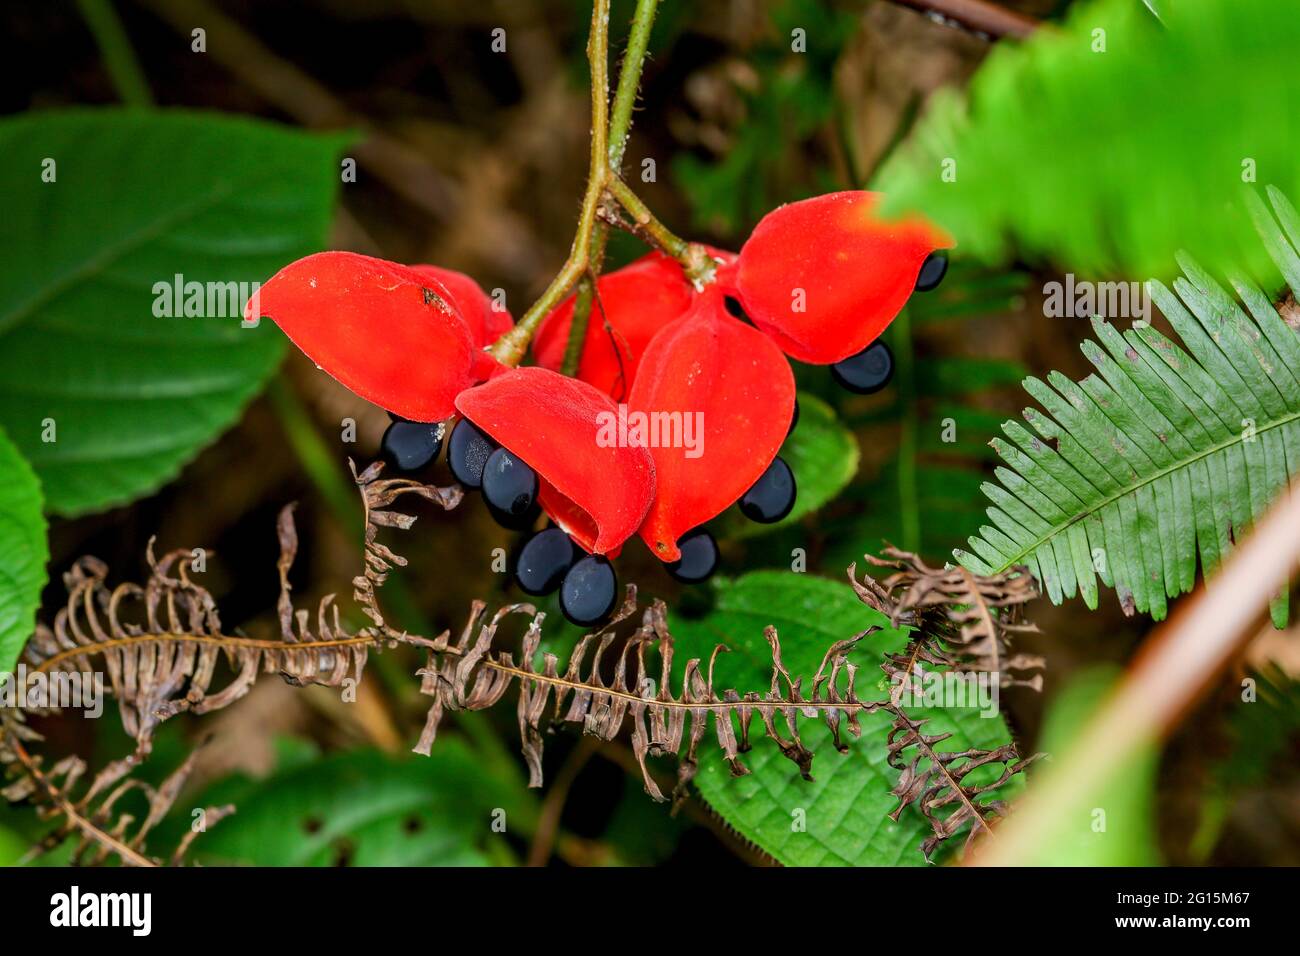 Unusual red seed pods with black seeds of the tropical chestnut plant in the Sterculia genus of flowering plants. Stock Photo